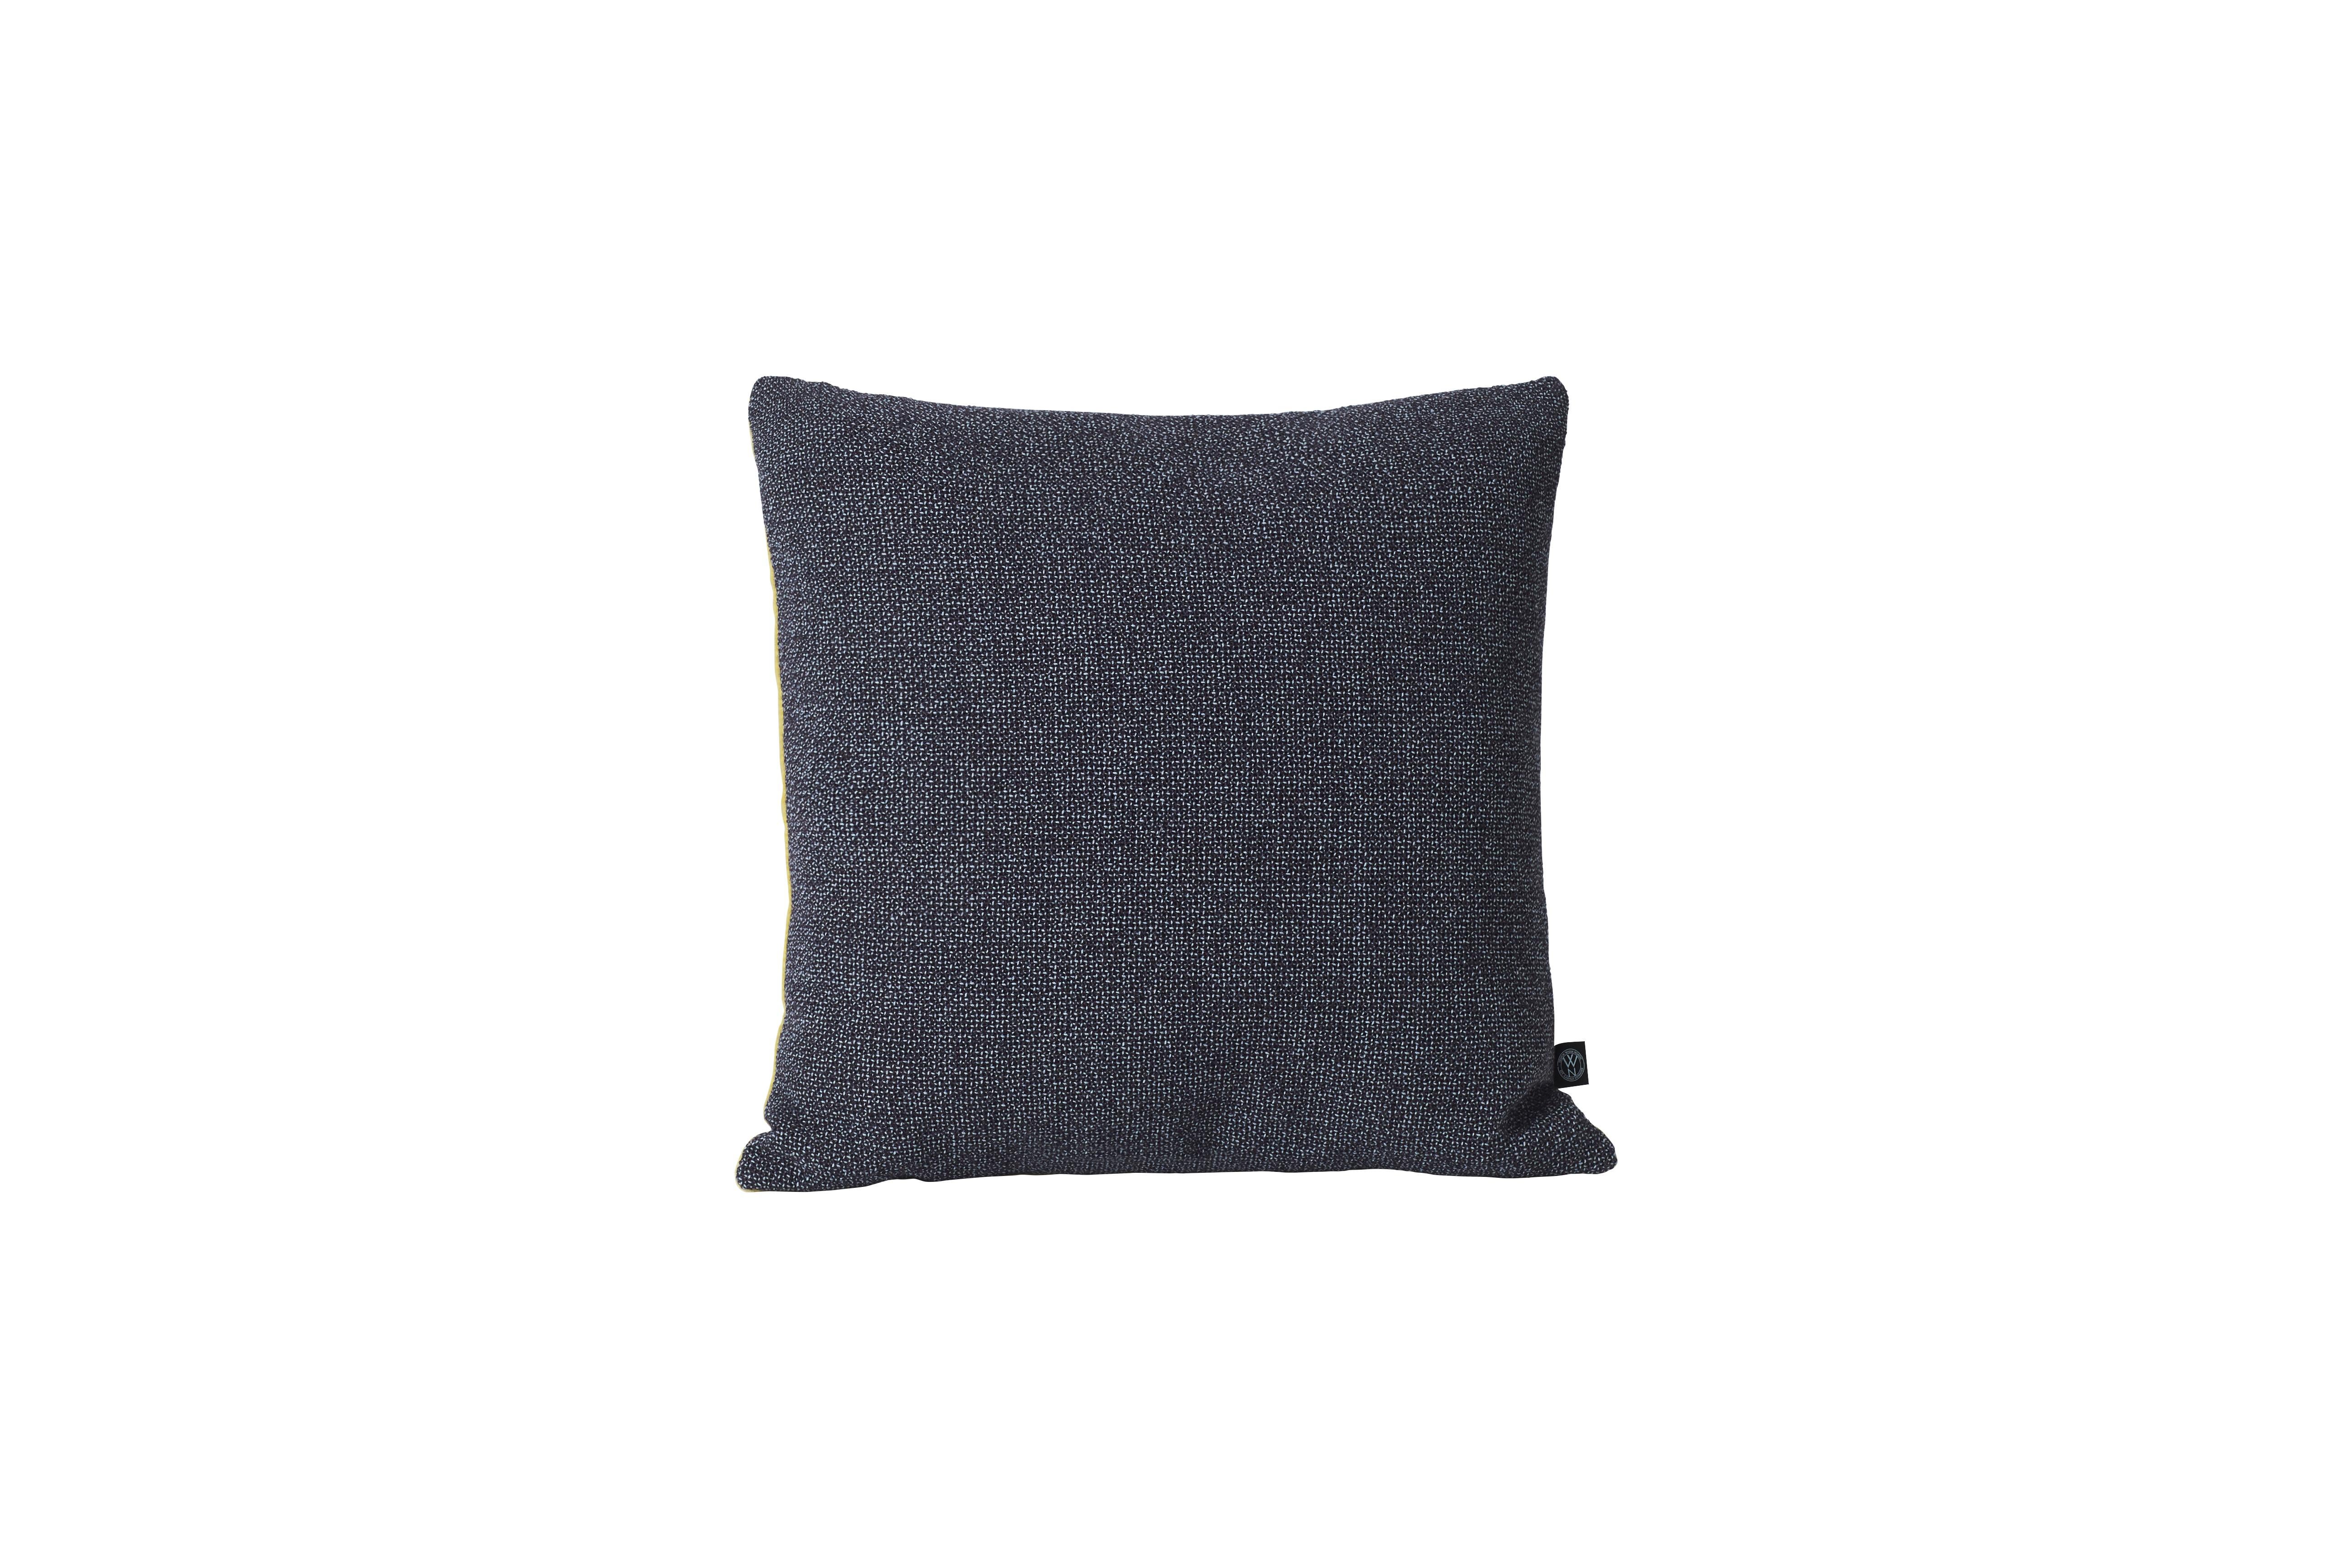 For Sale: Multi (Blue) Moodify Square Cushion, by Warm Nordic